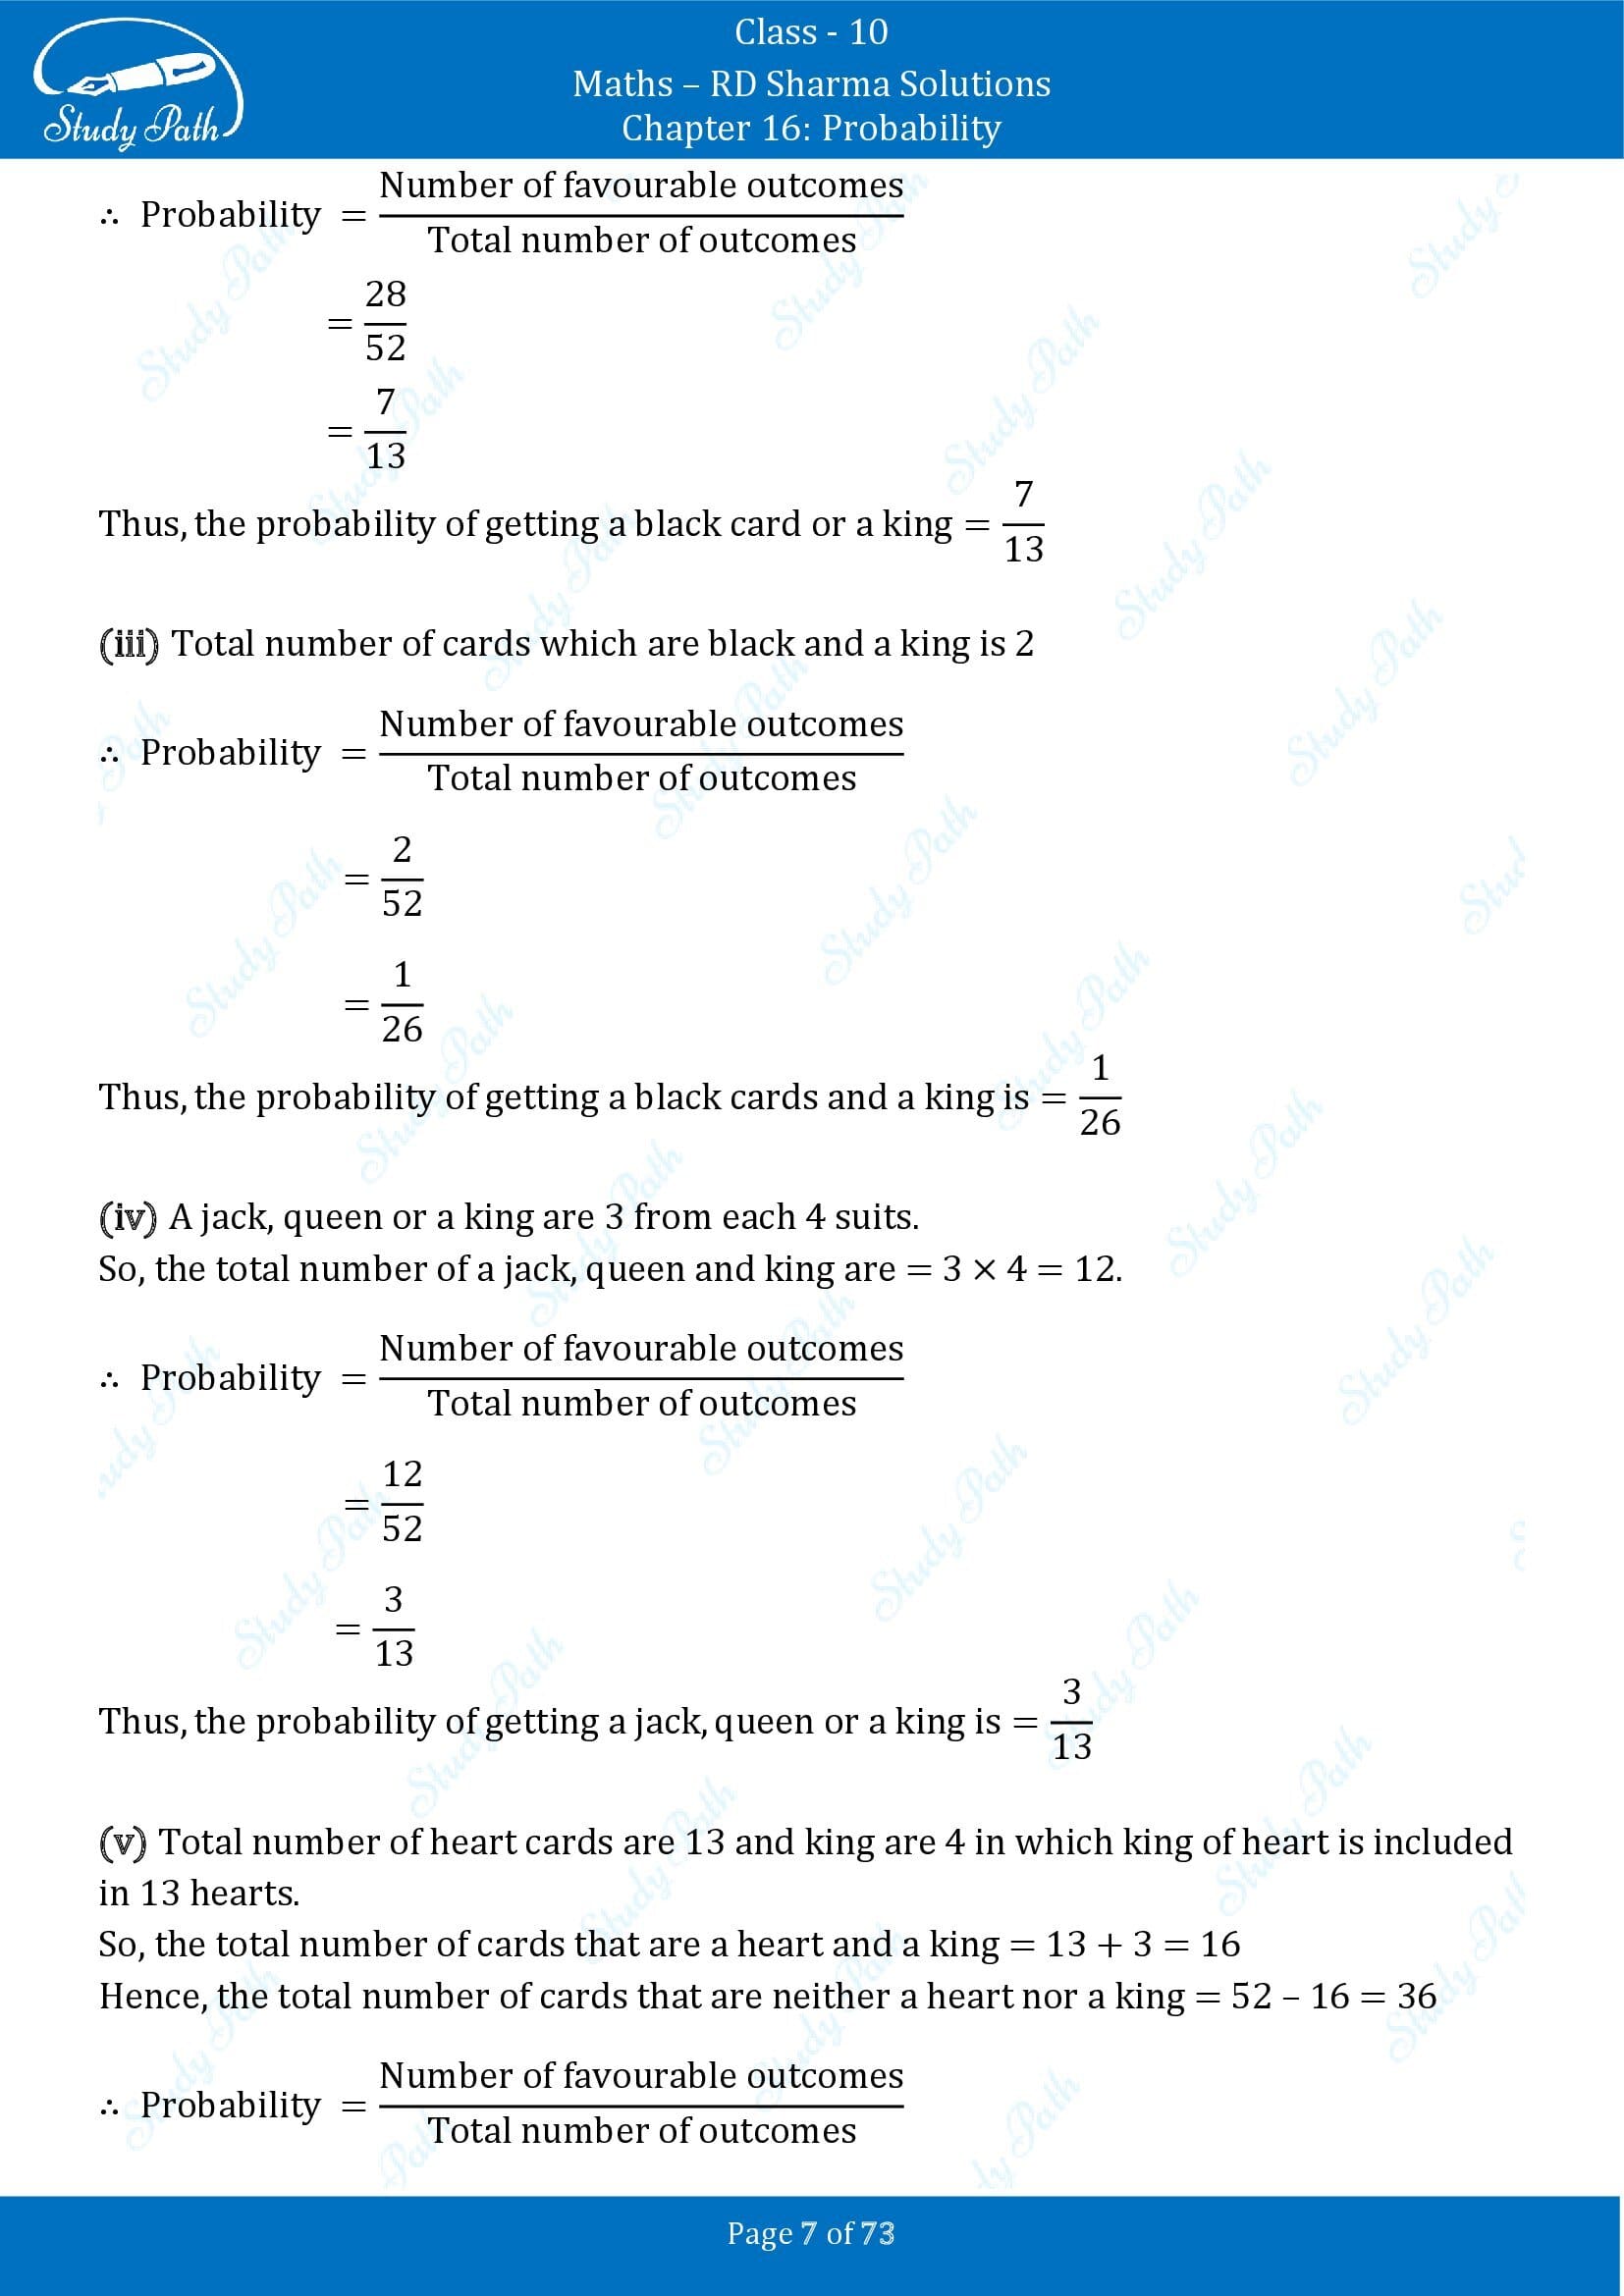 RD Sharma Solutions Class 10 Chapter 16 Probability Exercise 16.1 00007